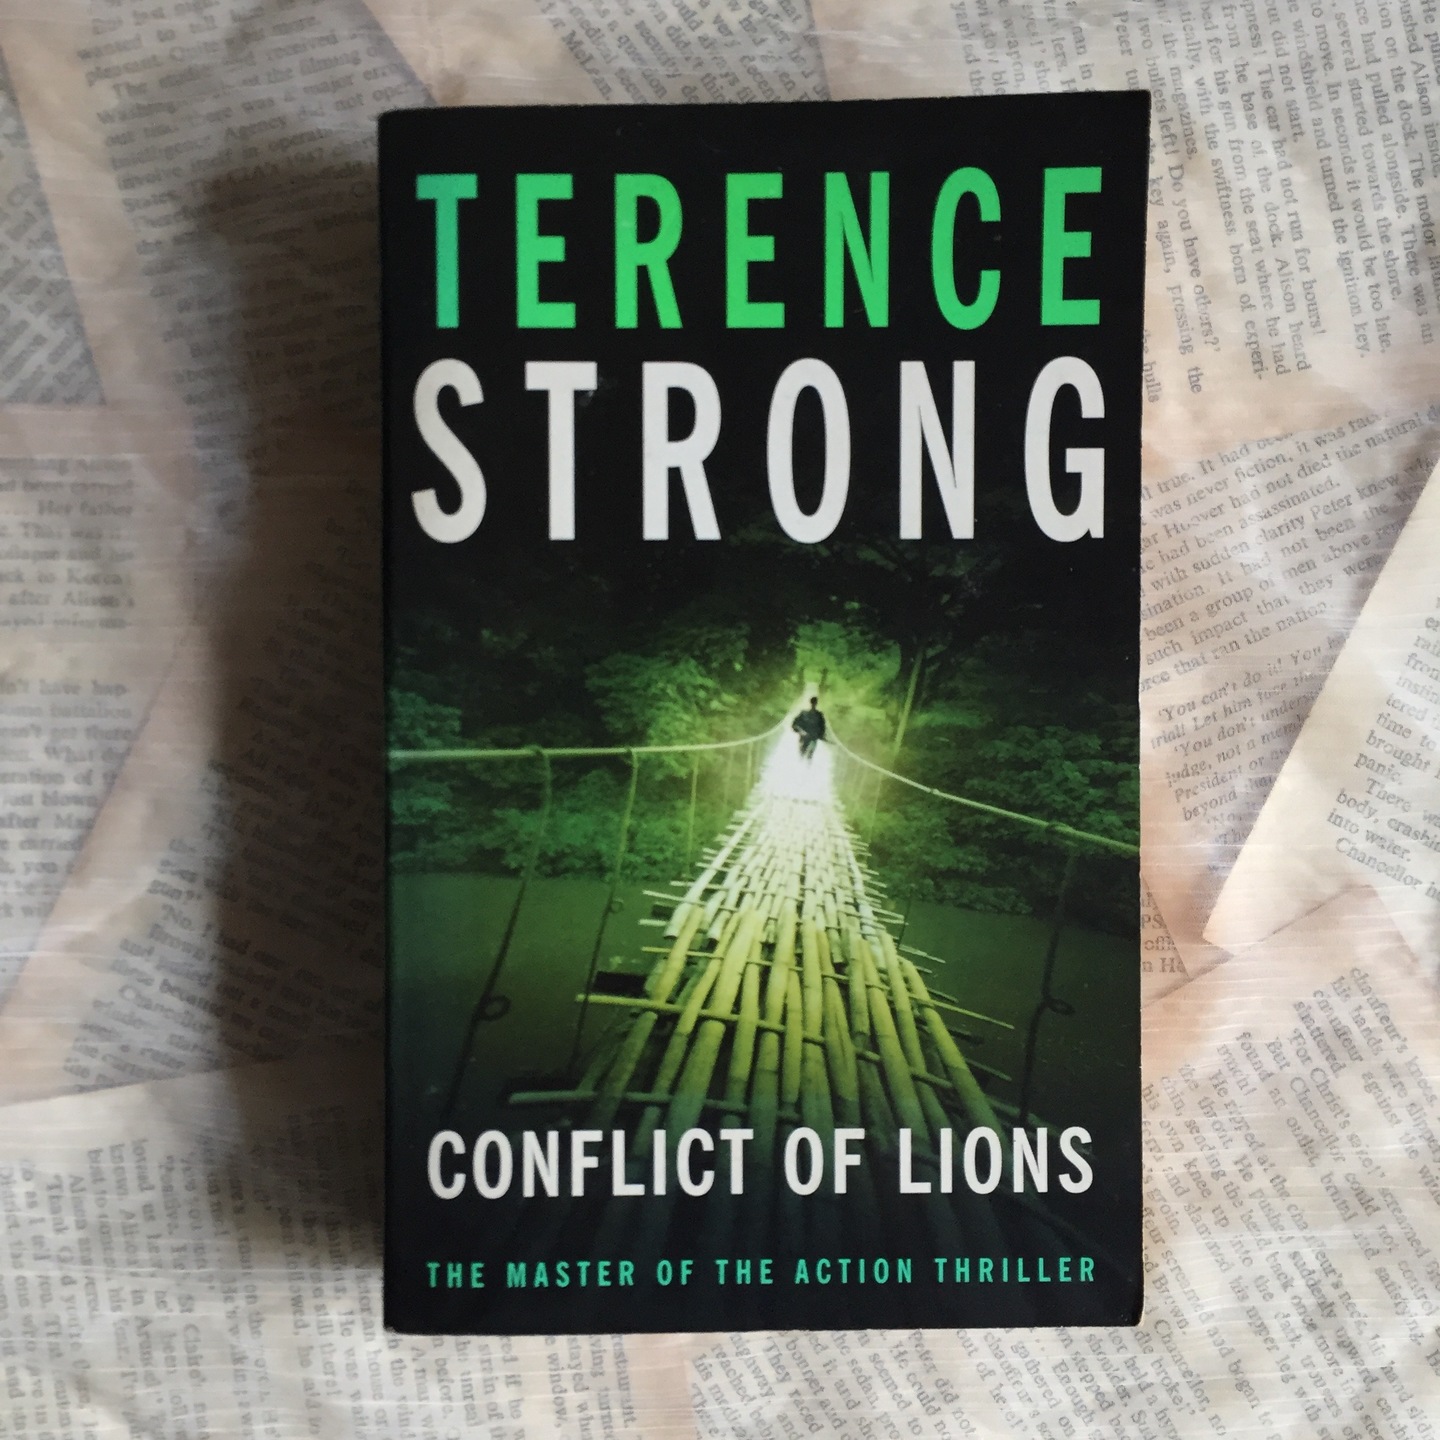 Conflict of Lions by Terence Strong [Paperback]